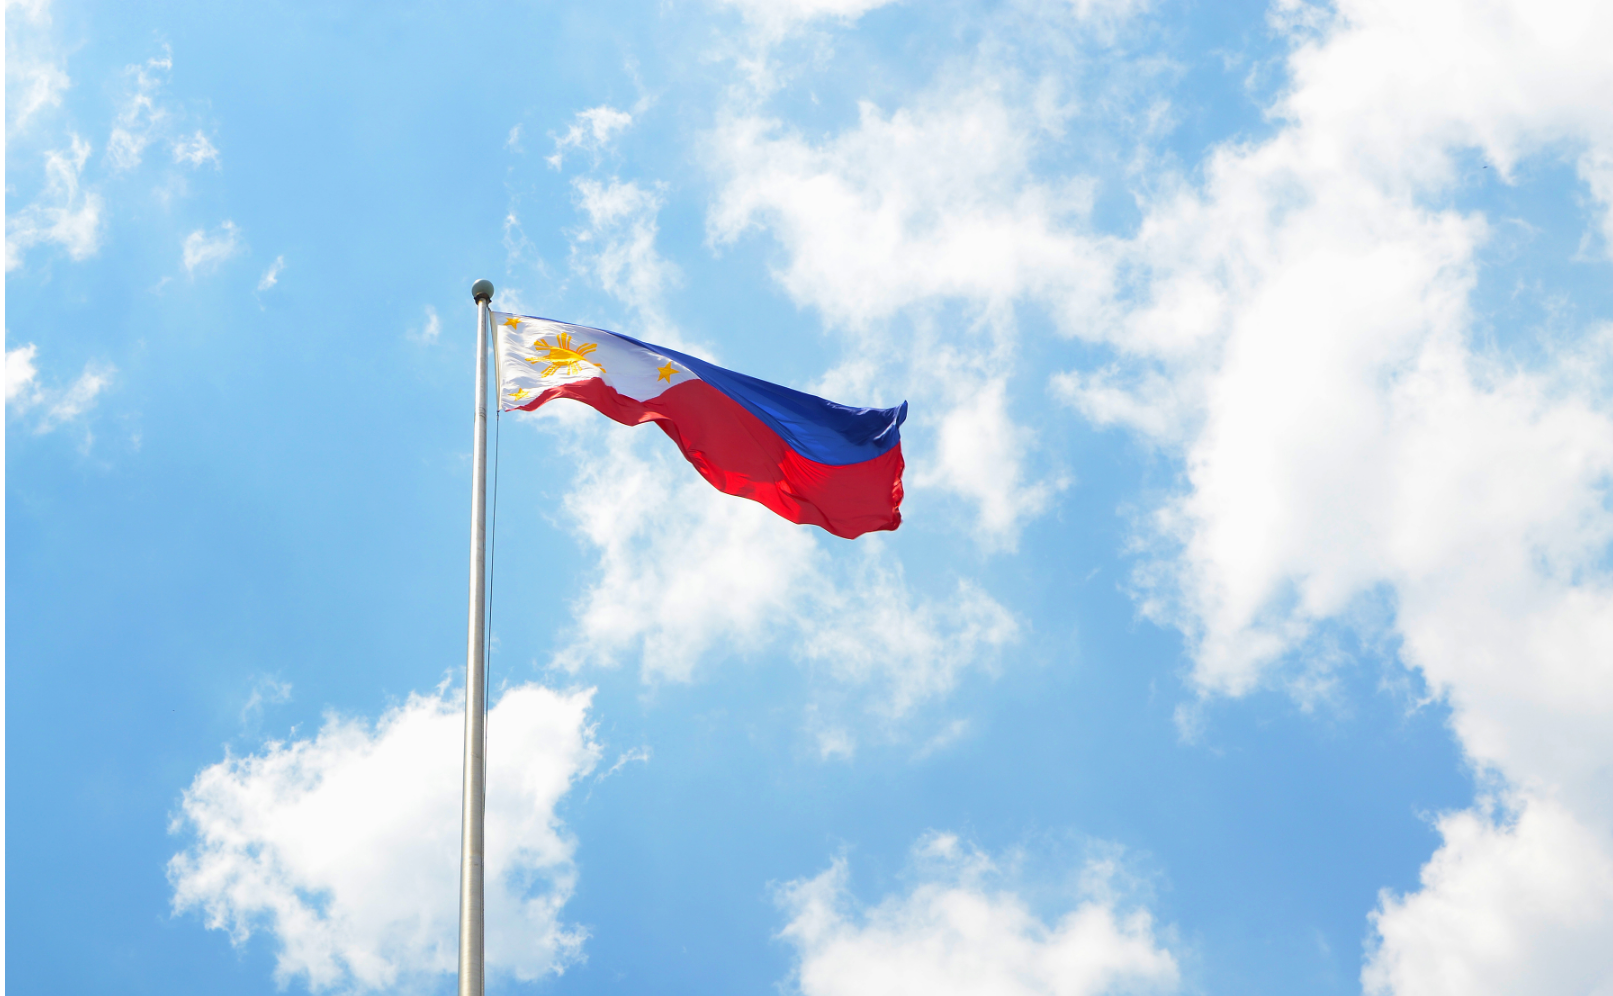 Philippines national budget 2022 will allocate PHP80 billion subsidies to PhilHealth